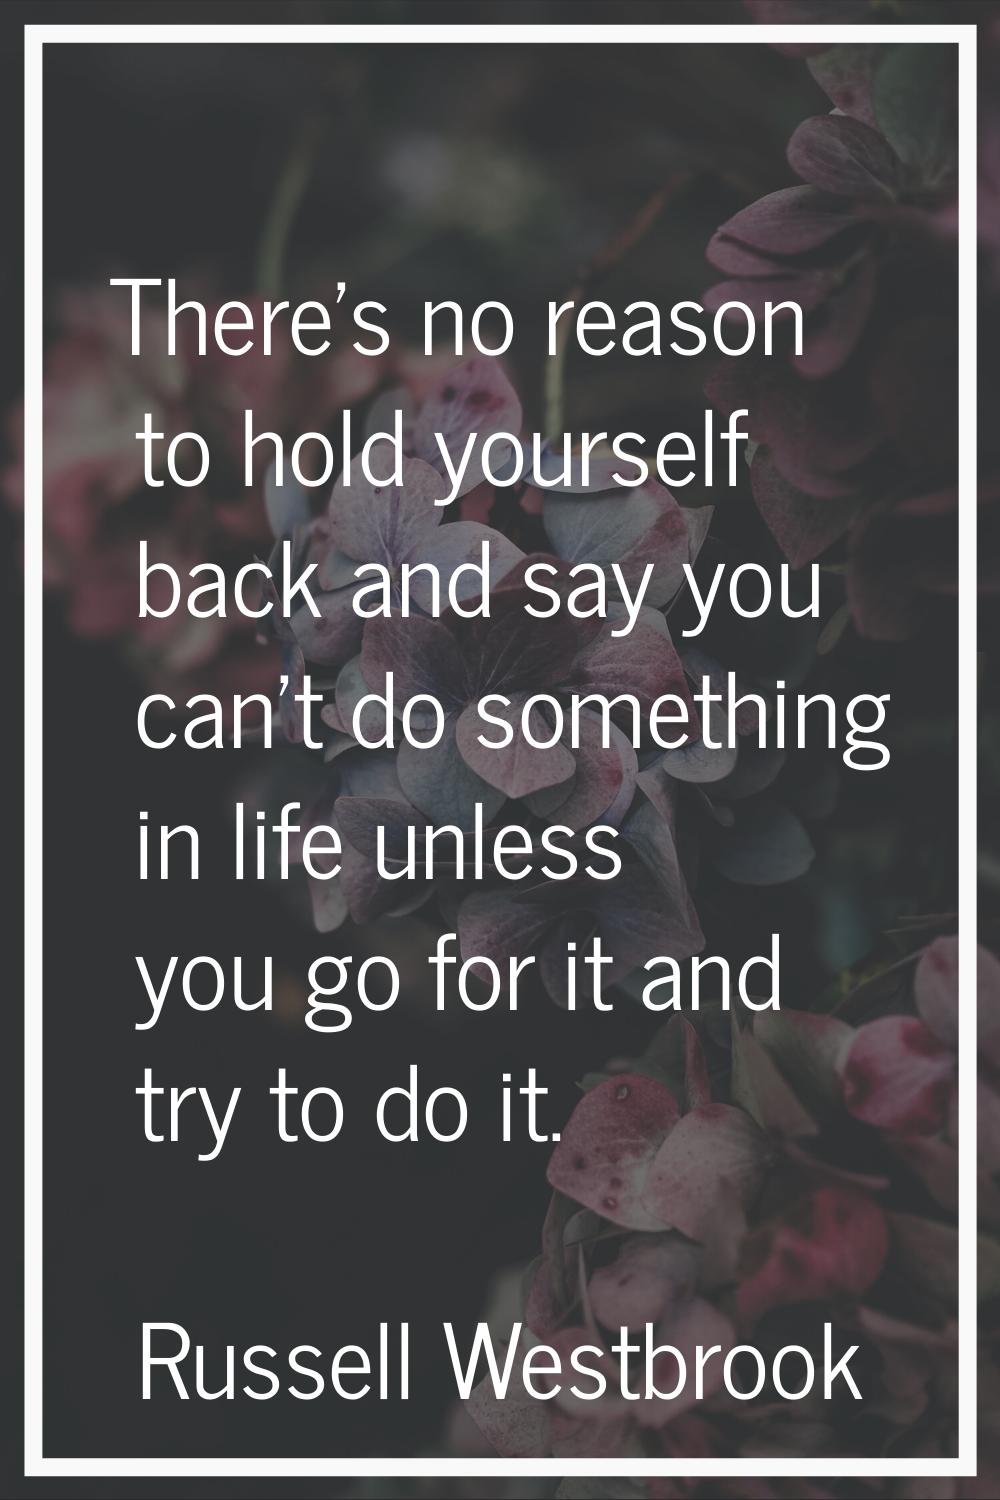 There's no reason to hold yourself back and say you can't do something in life unless you go for it